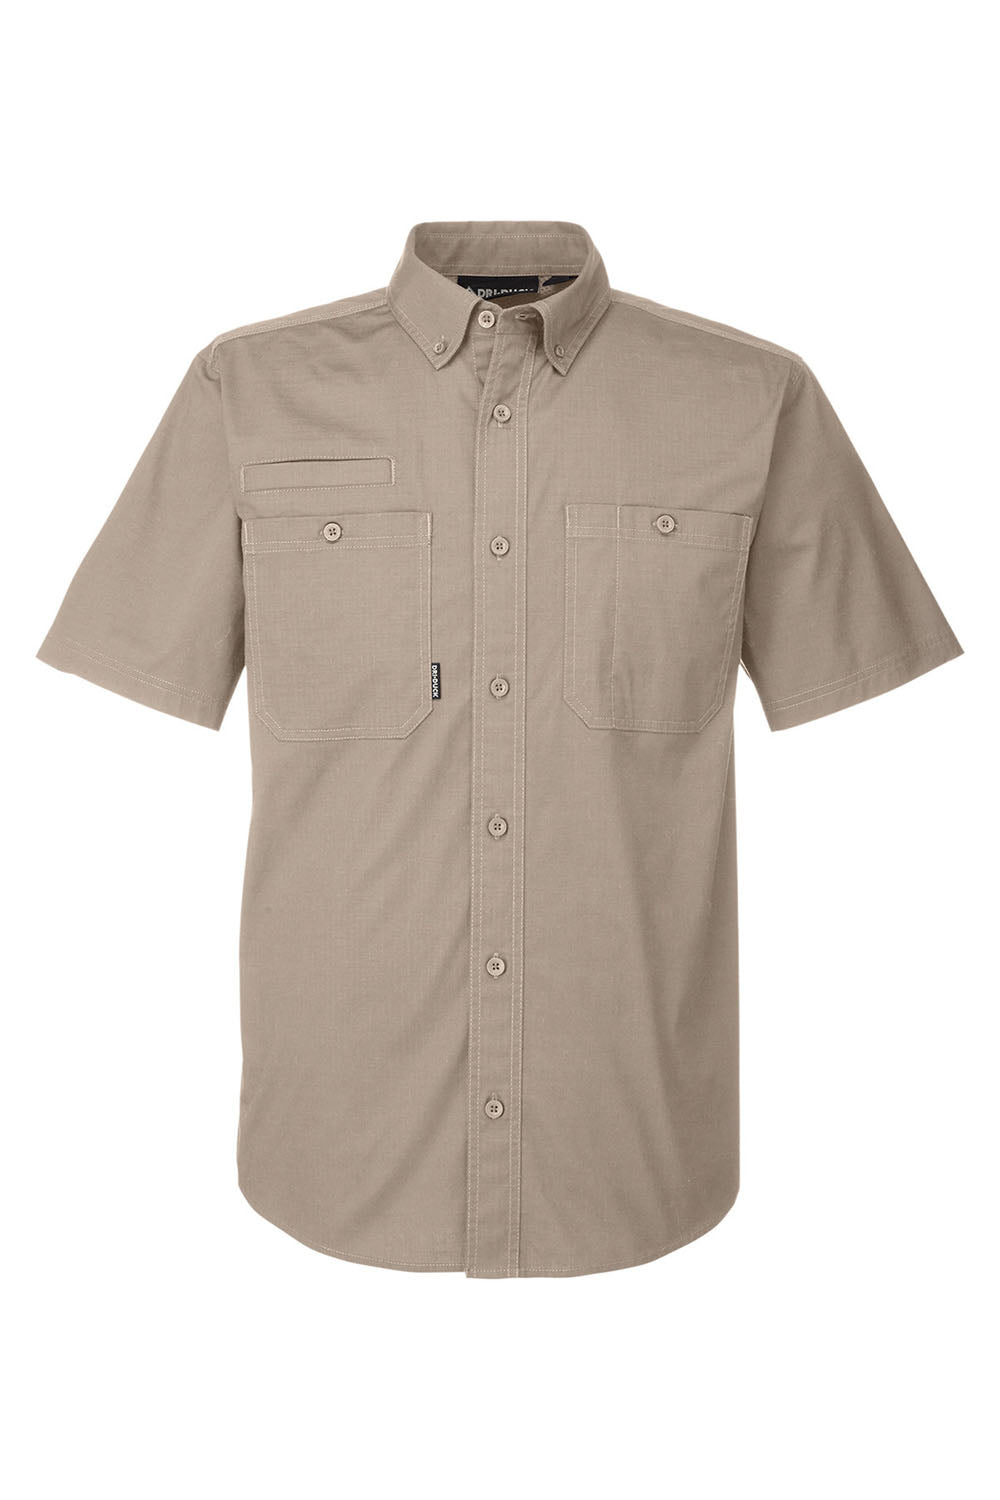 Dri Duck 4451DD Mens Craftsman Ripstop Short Sleeve Button Down Shirt w/ Double Pockets Rope Brown Flat Front